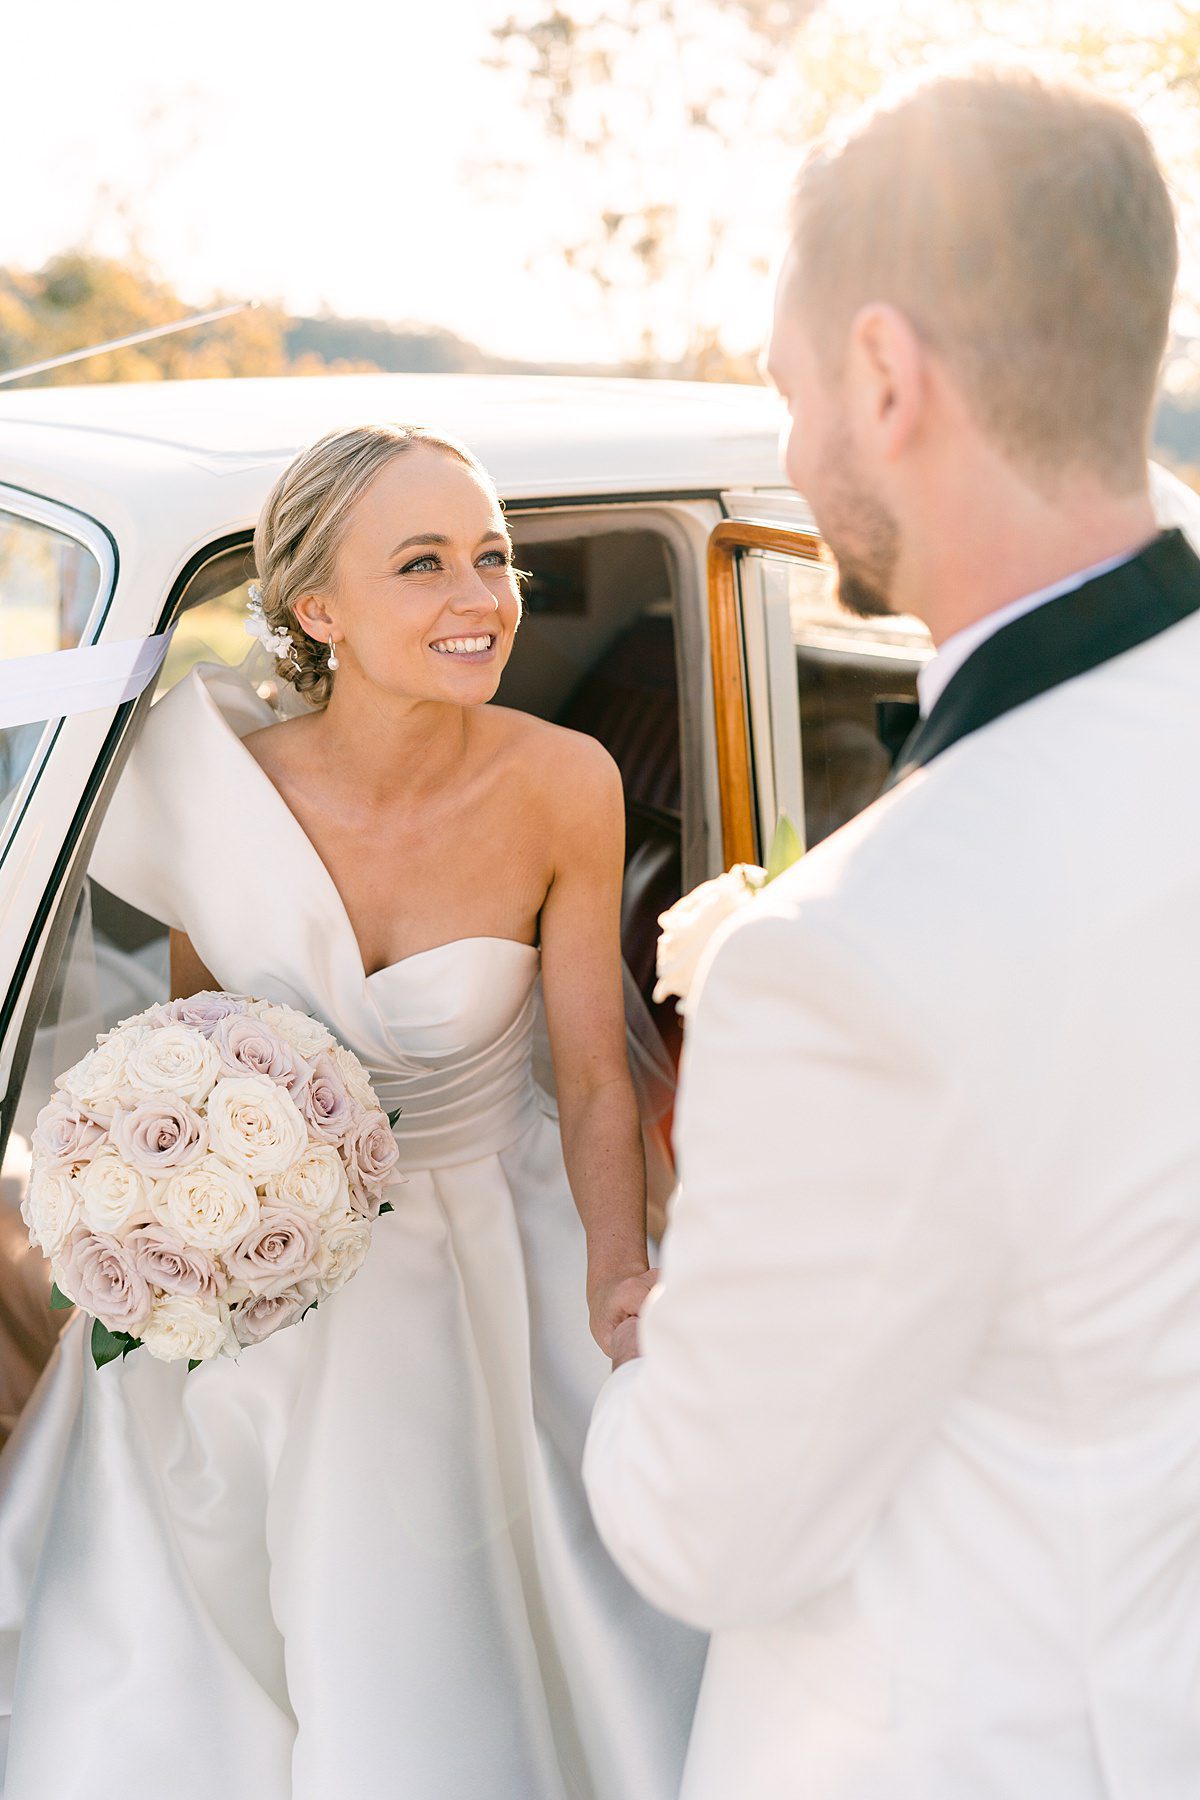 beautiful image of bride holding the groom's hand in an antique car